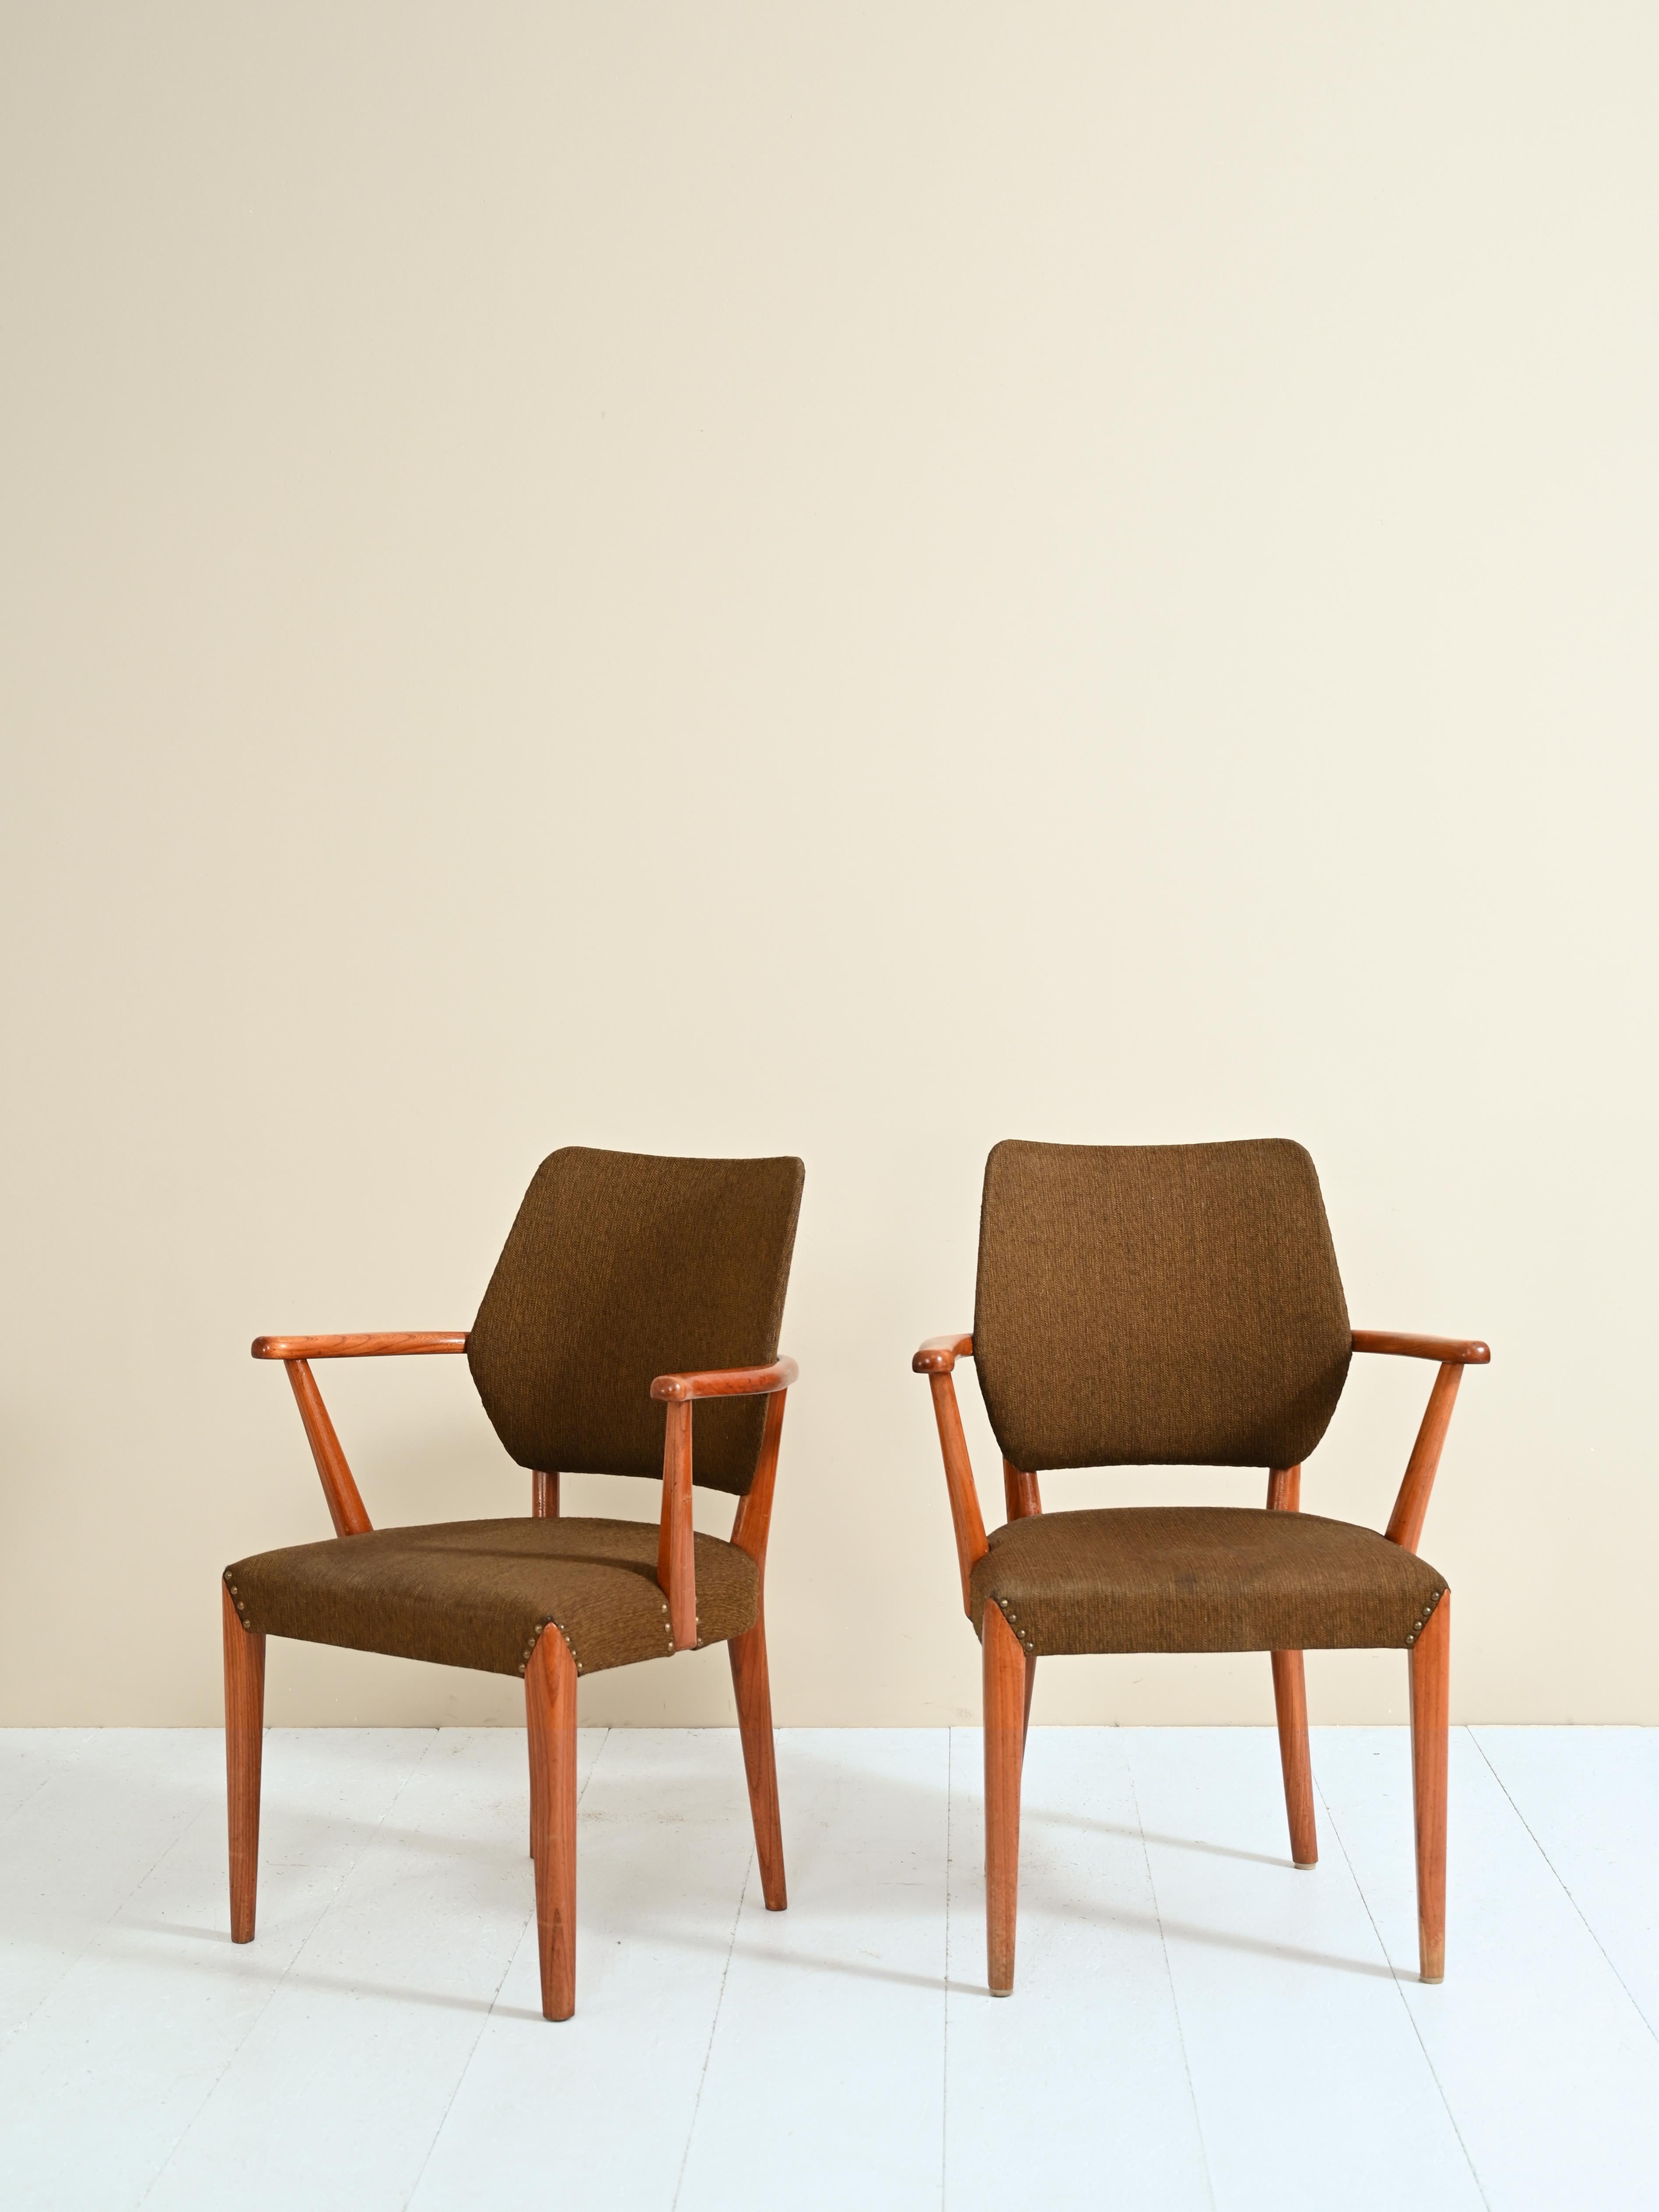 Set of two chairs of original Scandinavian manufacture from the 1950s.

The fabric is original and the condition of the upholstery is good.

Fair condition: the upholstery is worn.

AC136